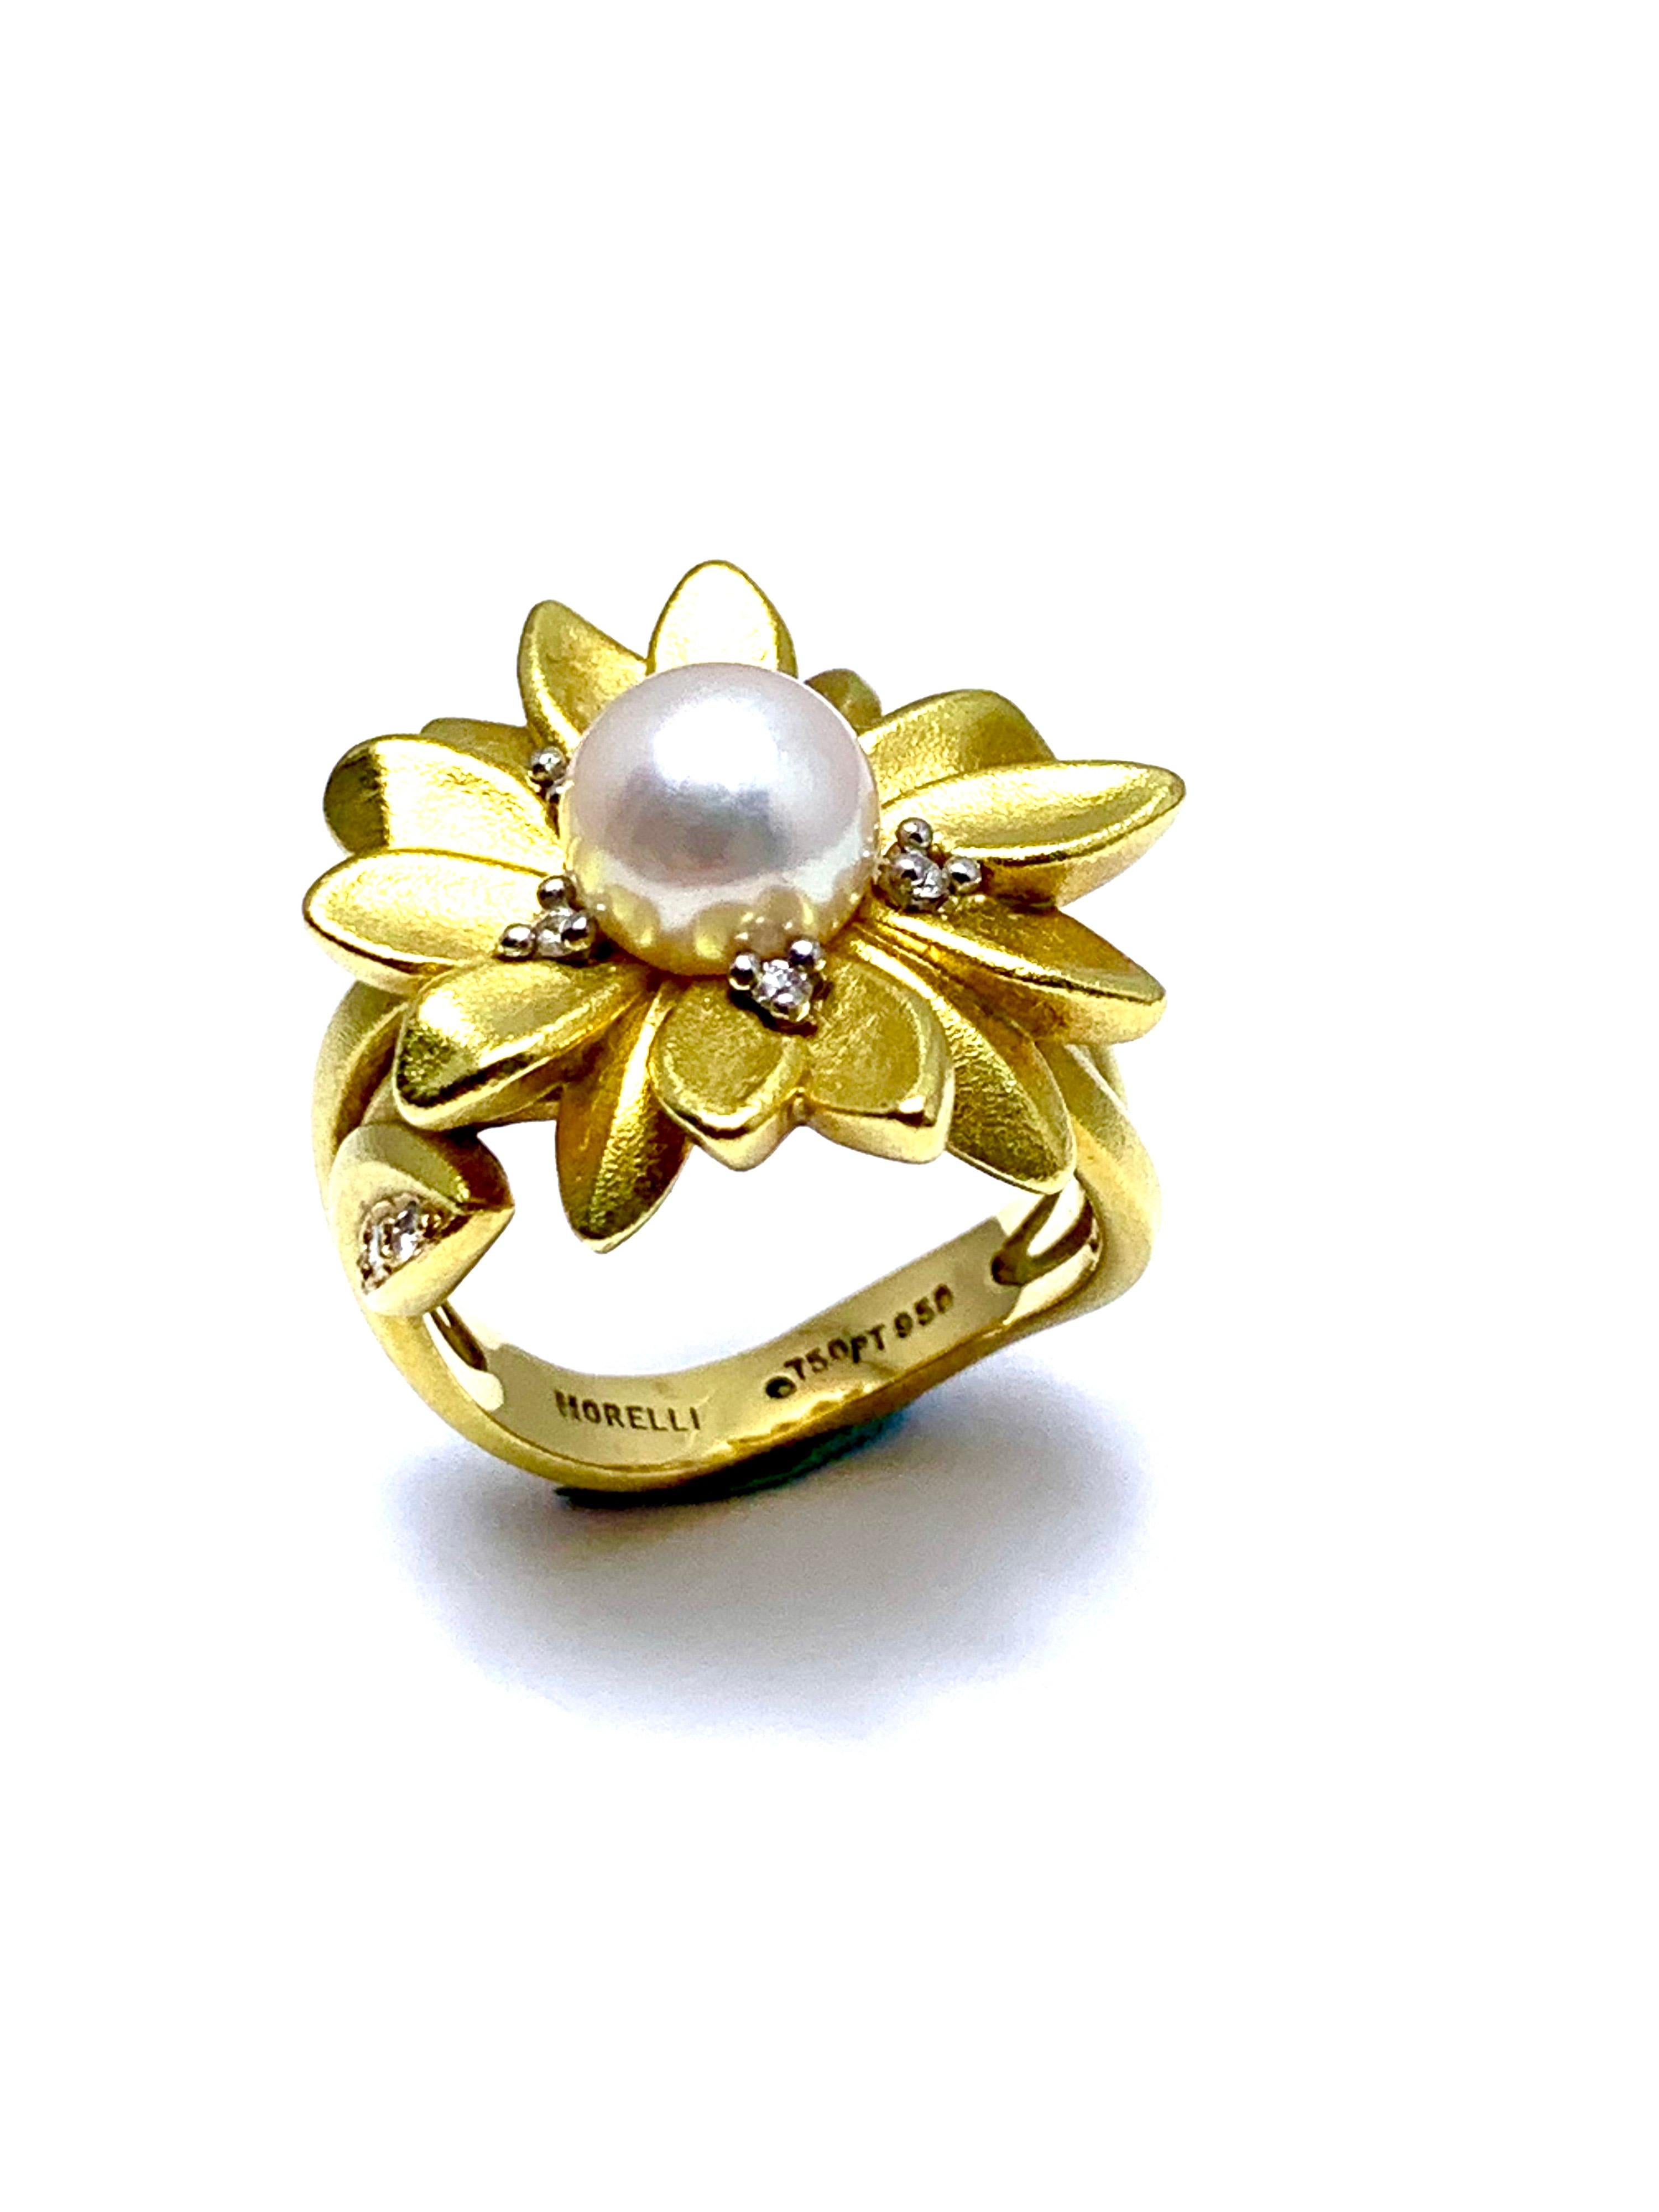 A gorgeous Paul Morelli cultured Pearl and Diamond daisy flower ring.  The center set pearl is 7.70mm, set with five diamonds around flower top of the ring, and six more diamonds set in the leaves of the stem shank of the ring.  The diamonds have a